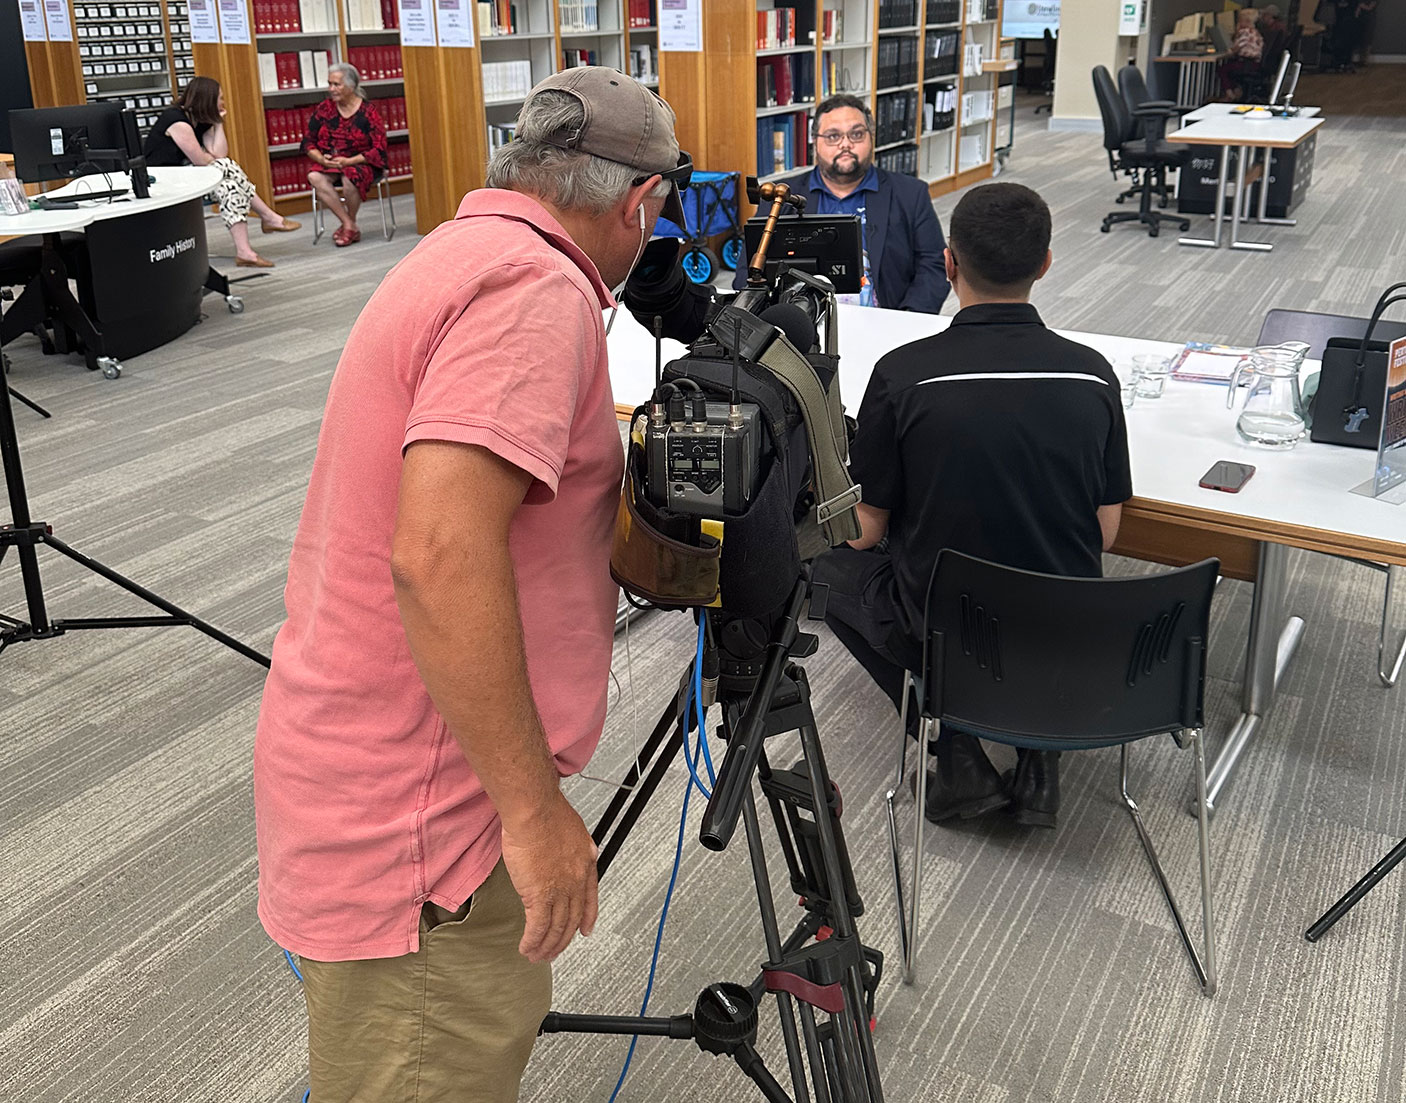 At the State Library, Community Education Officer, Duane Kelly being interviewed by Kearyn Cox from NITV.  A TV cameraman films the interview.